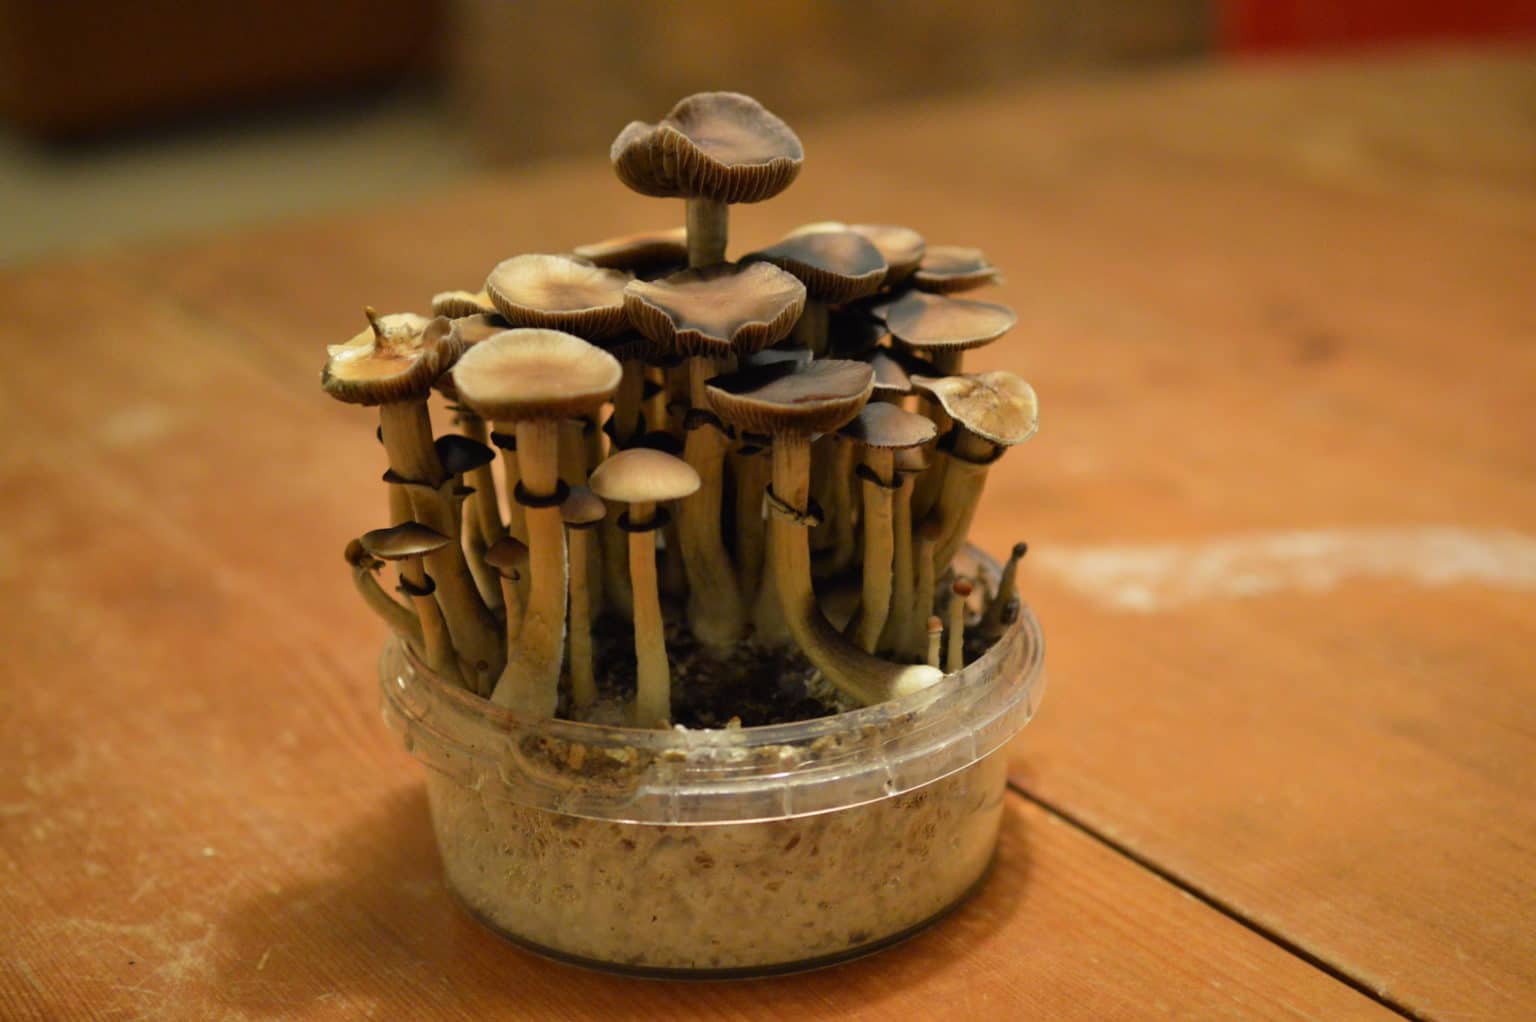 Where Can You (Legally) Buy Magic Mushrooms?